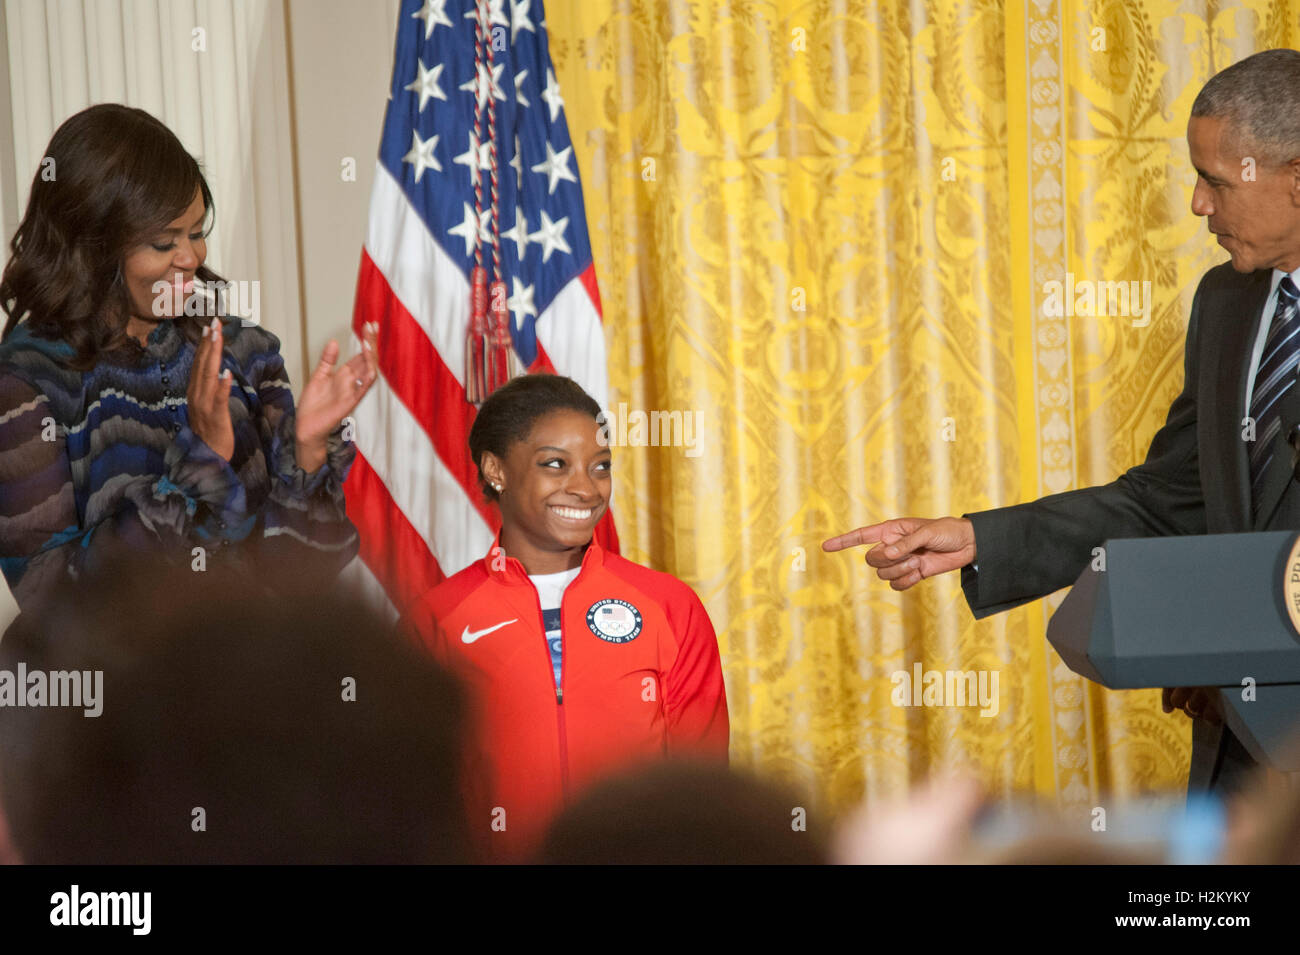 Washington DC, USA. 29th September, 2016.  Olympic Gold Medalist Simone Biles gets a  shout out from President Barack Obama as he welcomes the 2016 Summer Olympic Team to the White House.  Patsy Lynch/Alamy Credit:  Patsy Lynch/Alamy Live News Stock Photo